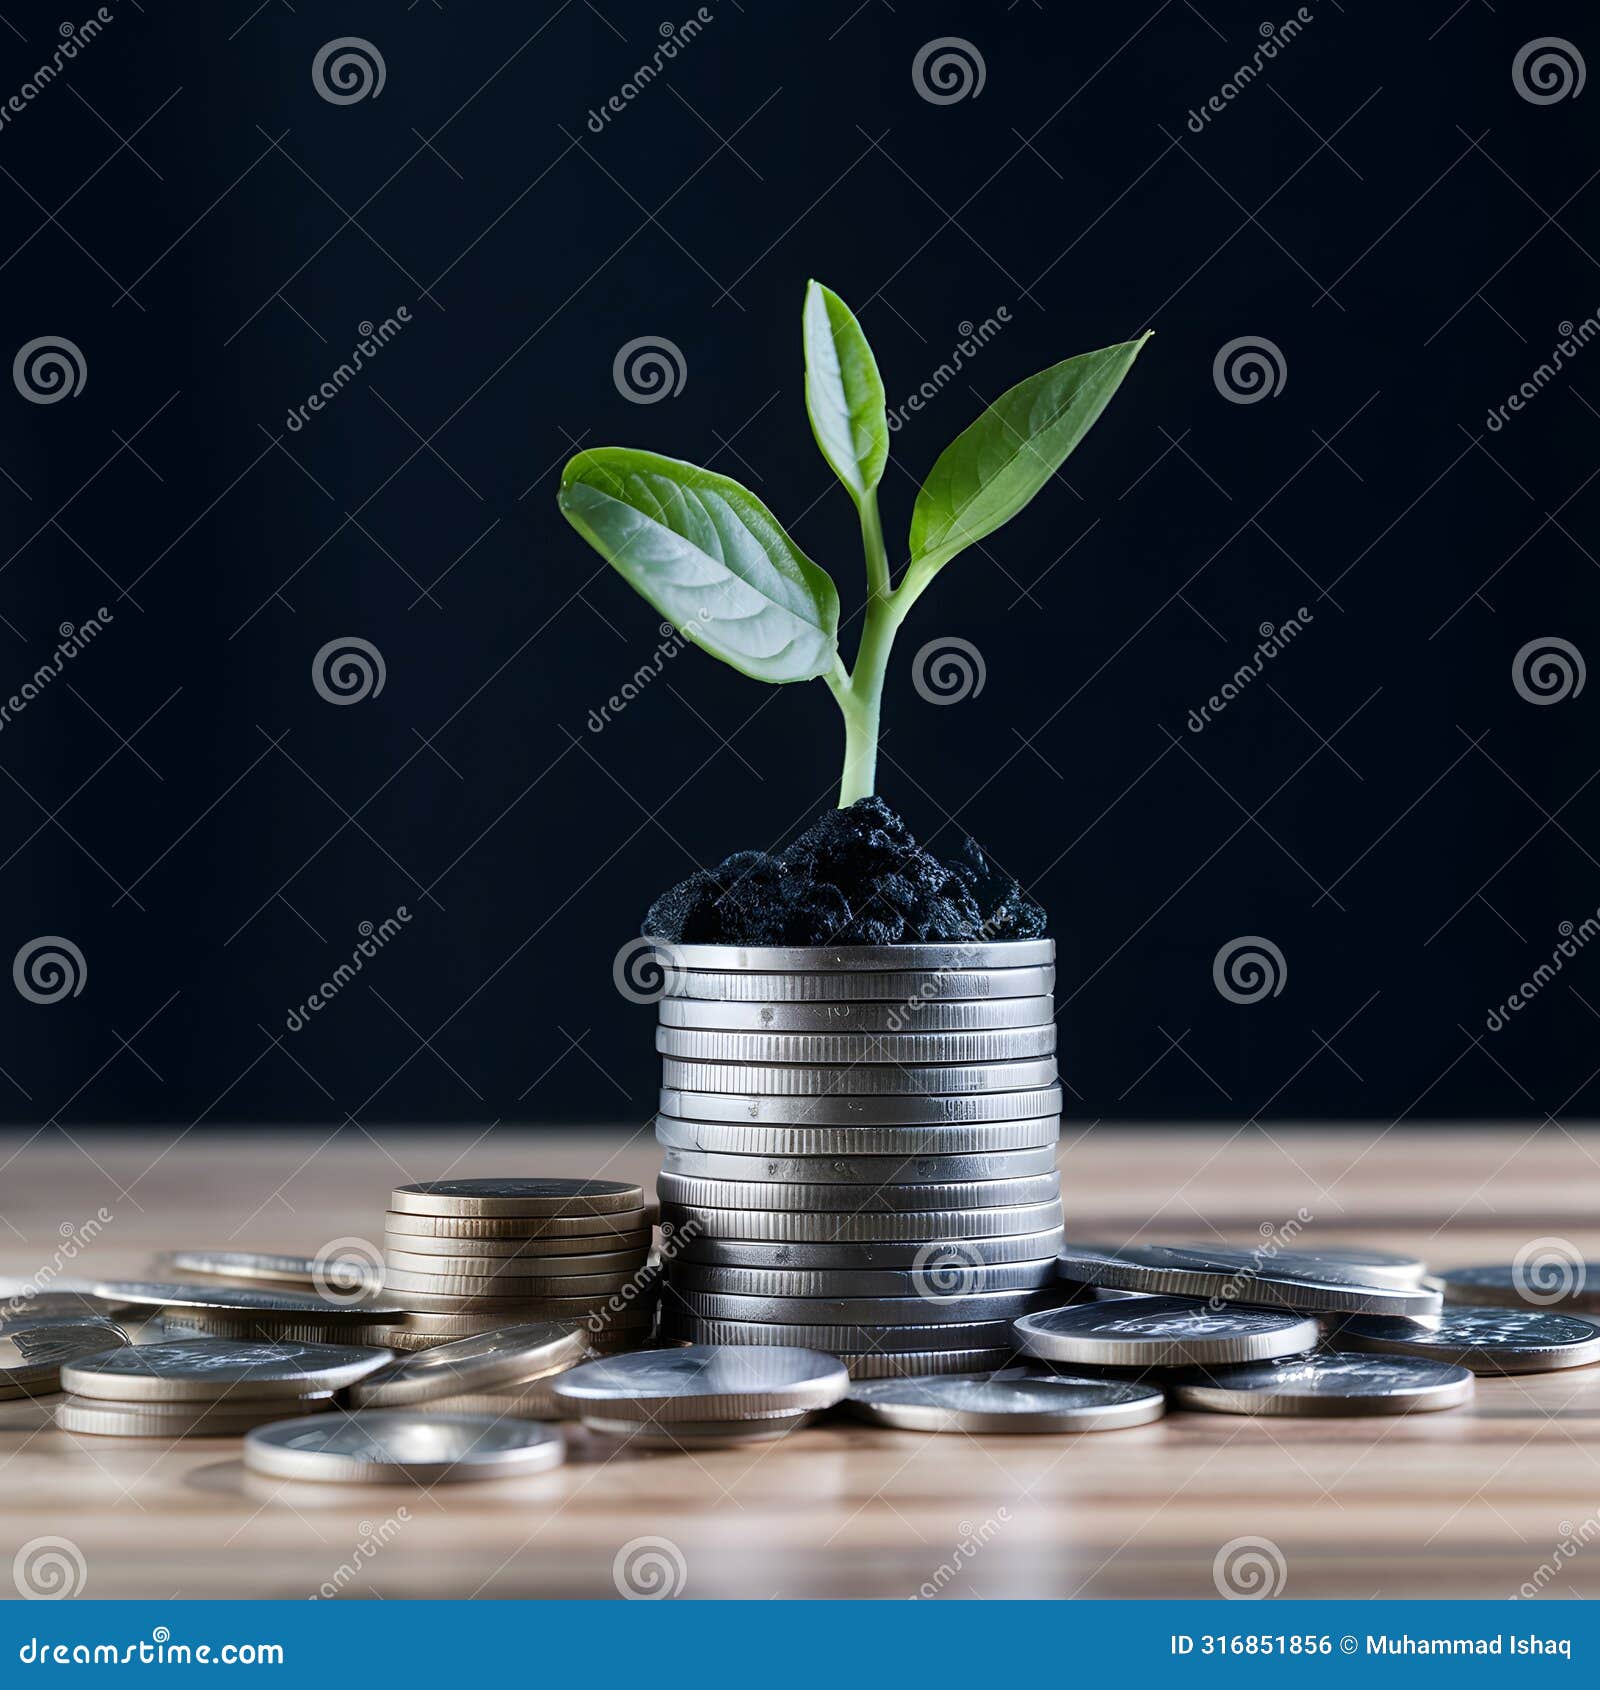 stockphoto investment concept, coins stack with green seedling on black